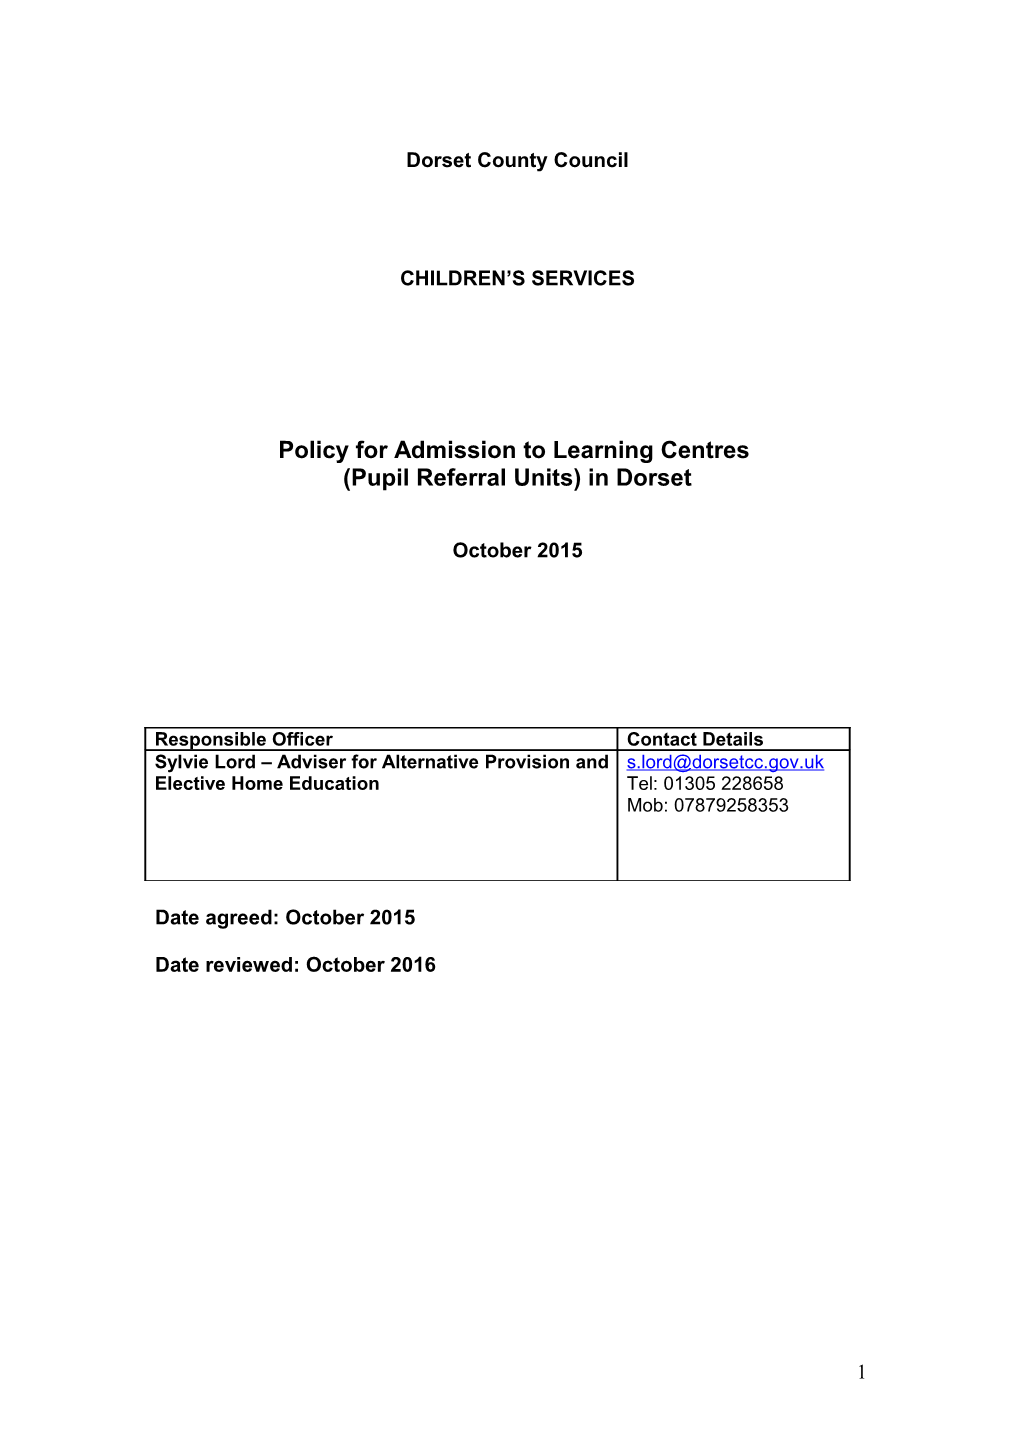 Admission to Learning Centres (Prus) in Dorset